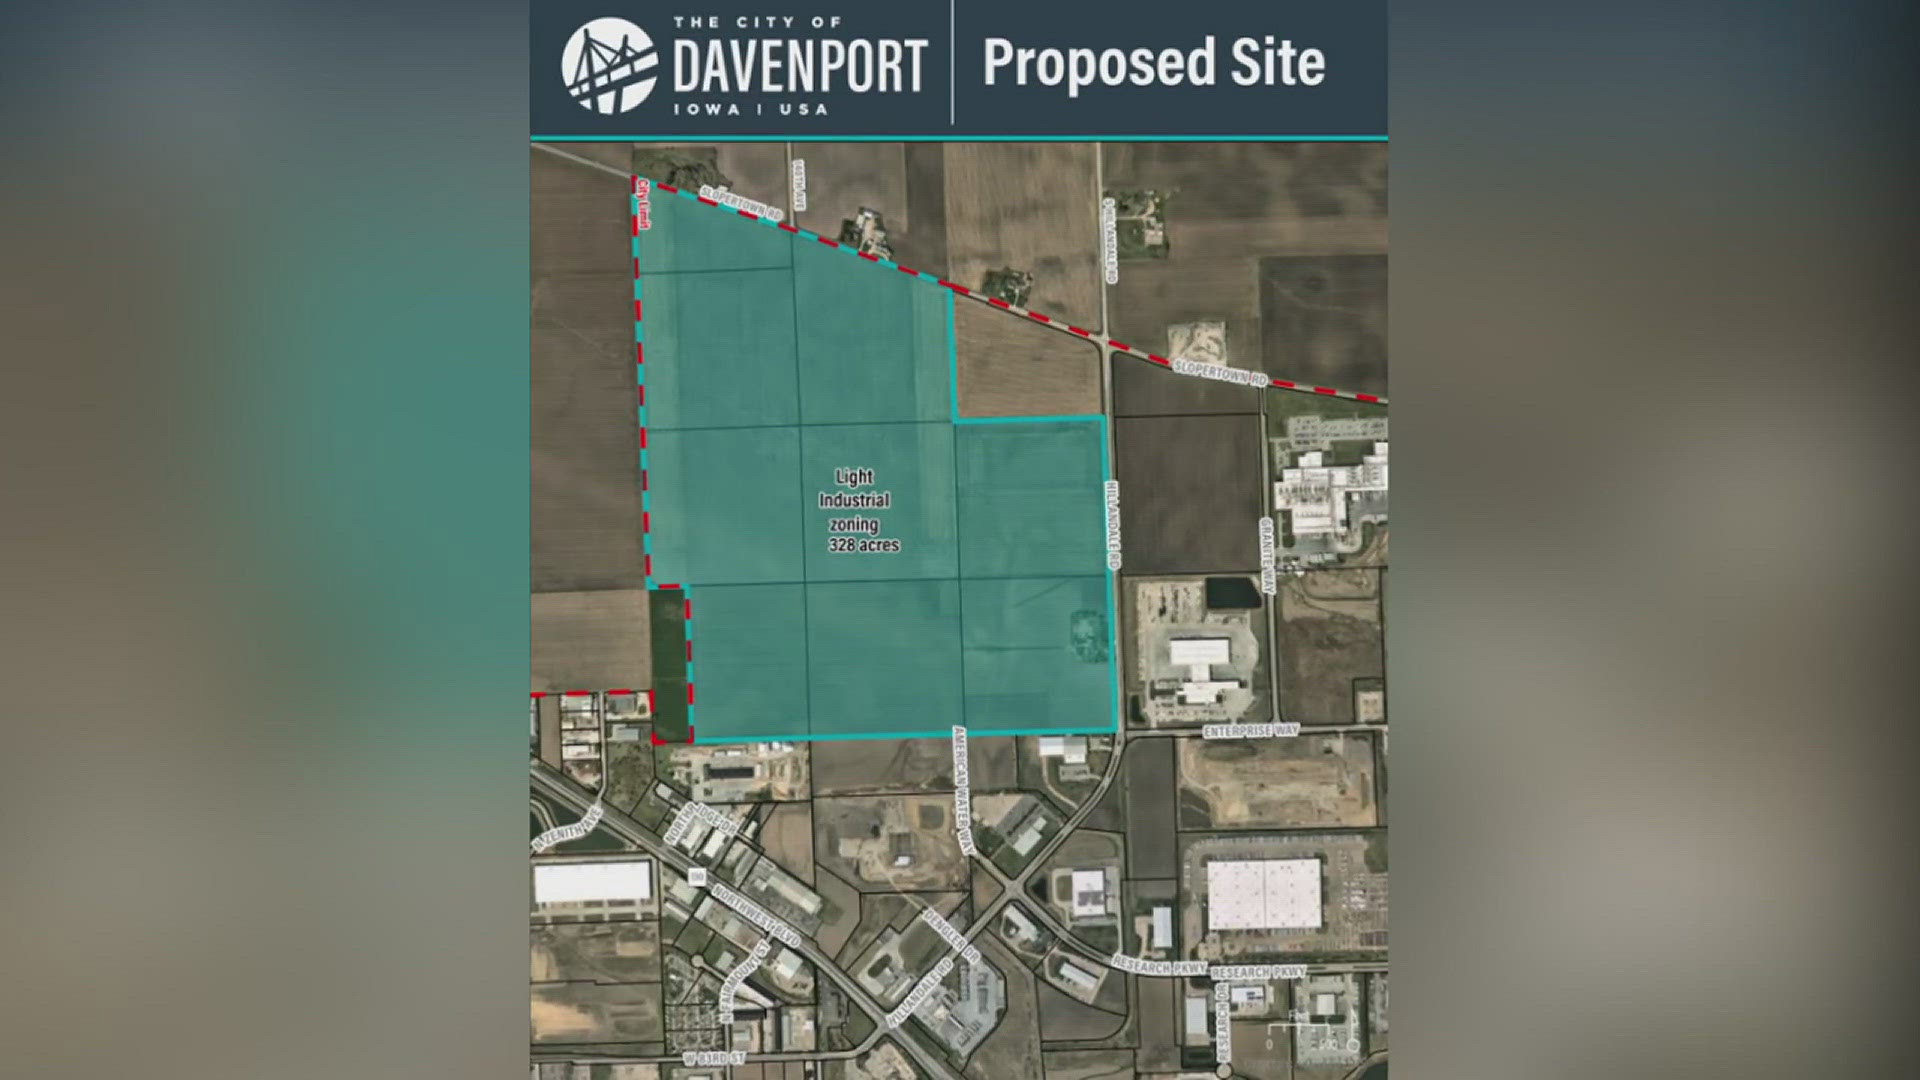 Vemerald LLC's proposed project will span around 328 acres in northern Davenport. The center would be used for storing and transferring user and customer data.